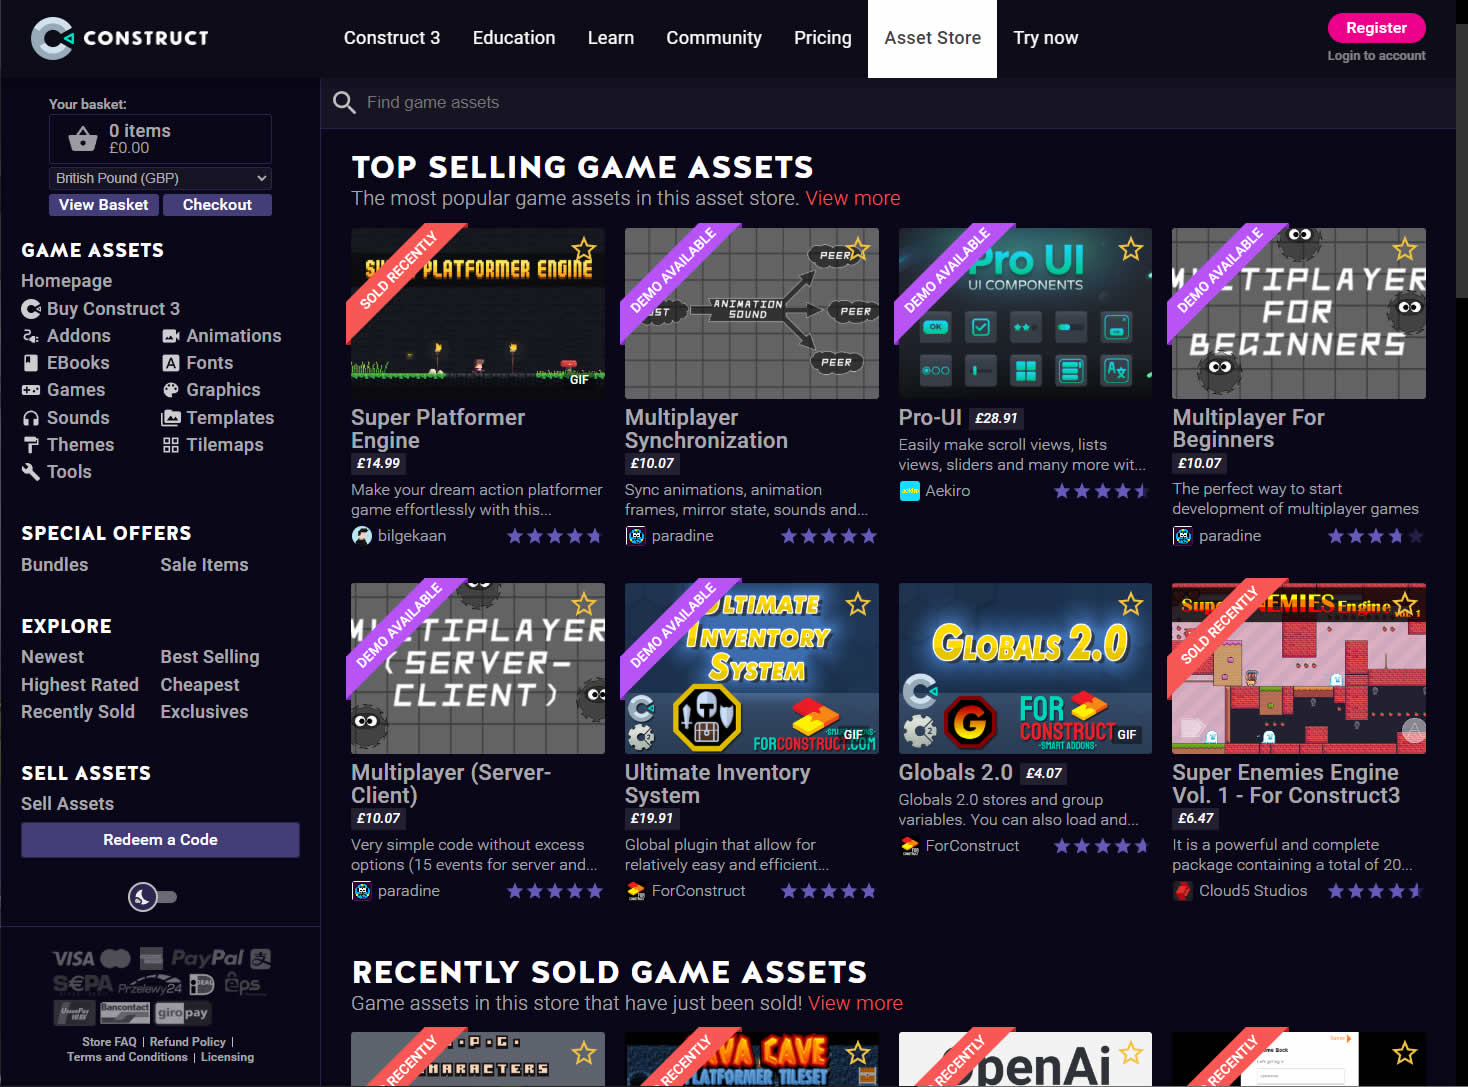 Our current asset store, allowing sellers to upload their assets and sell them through our system